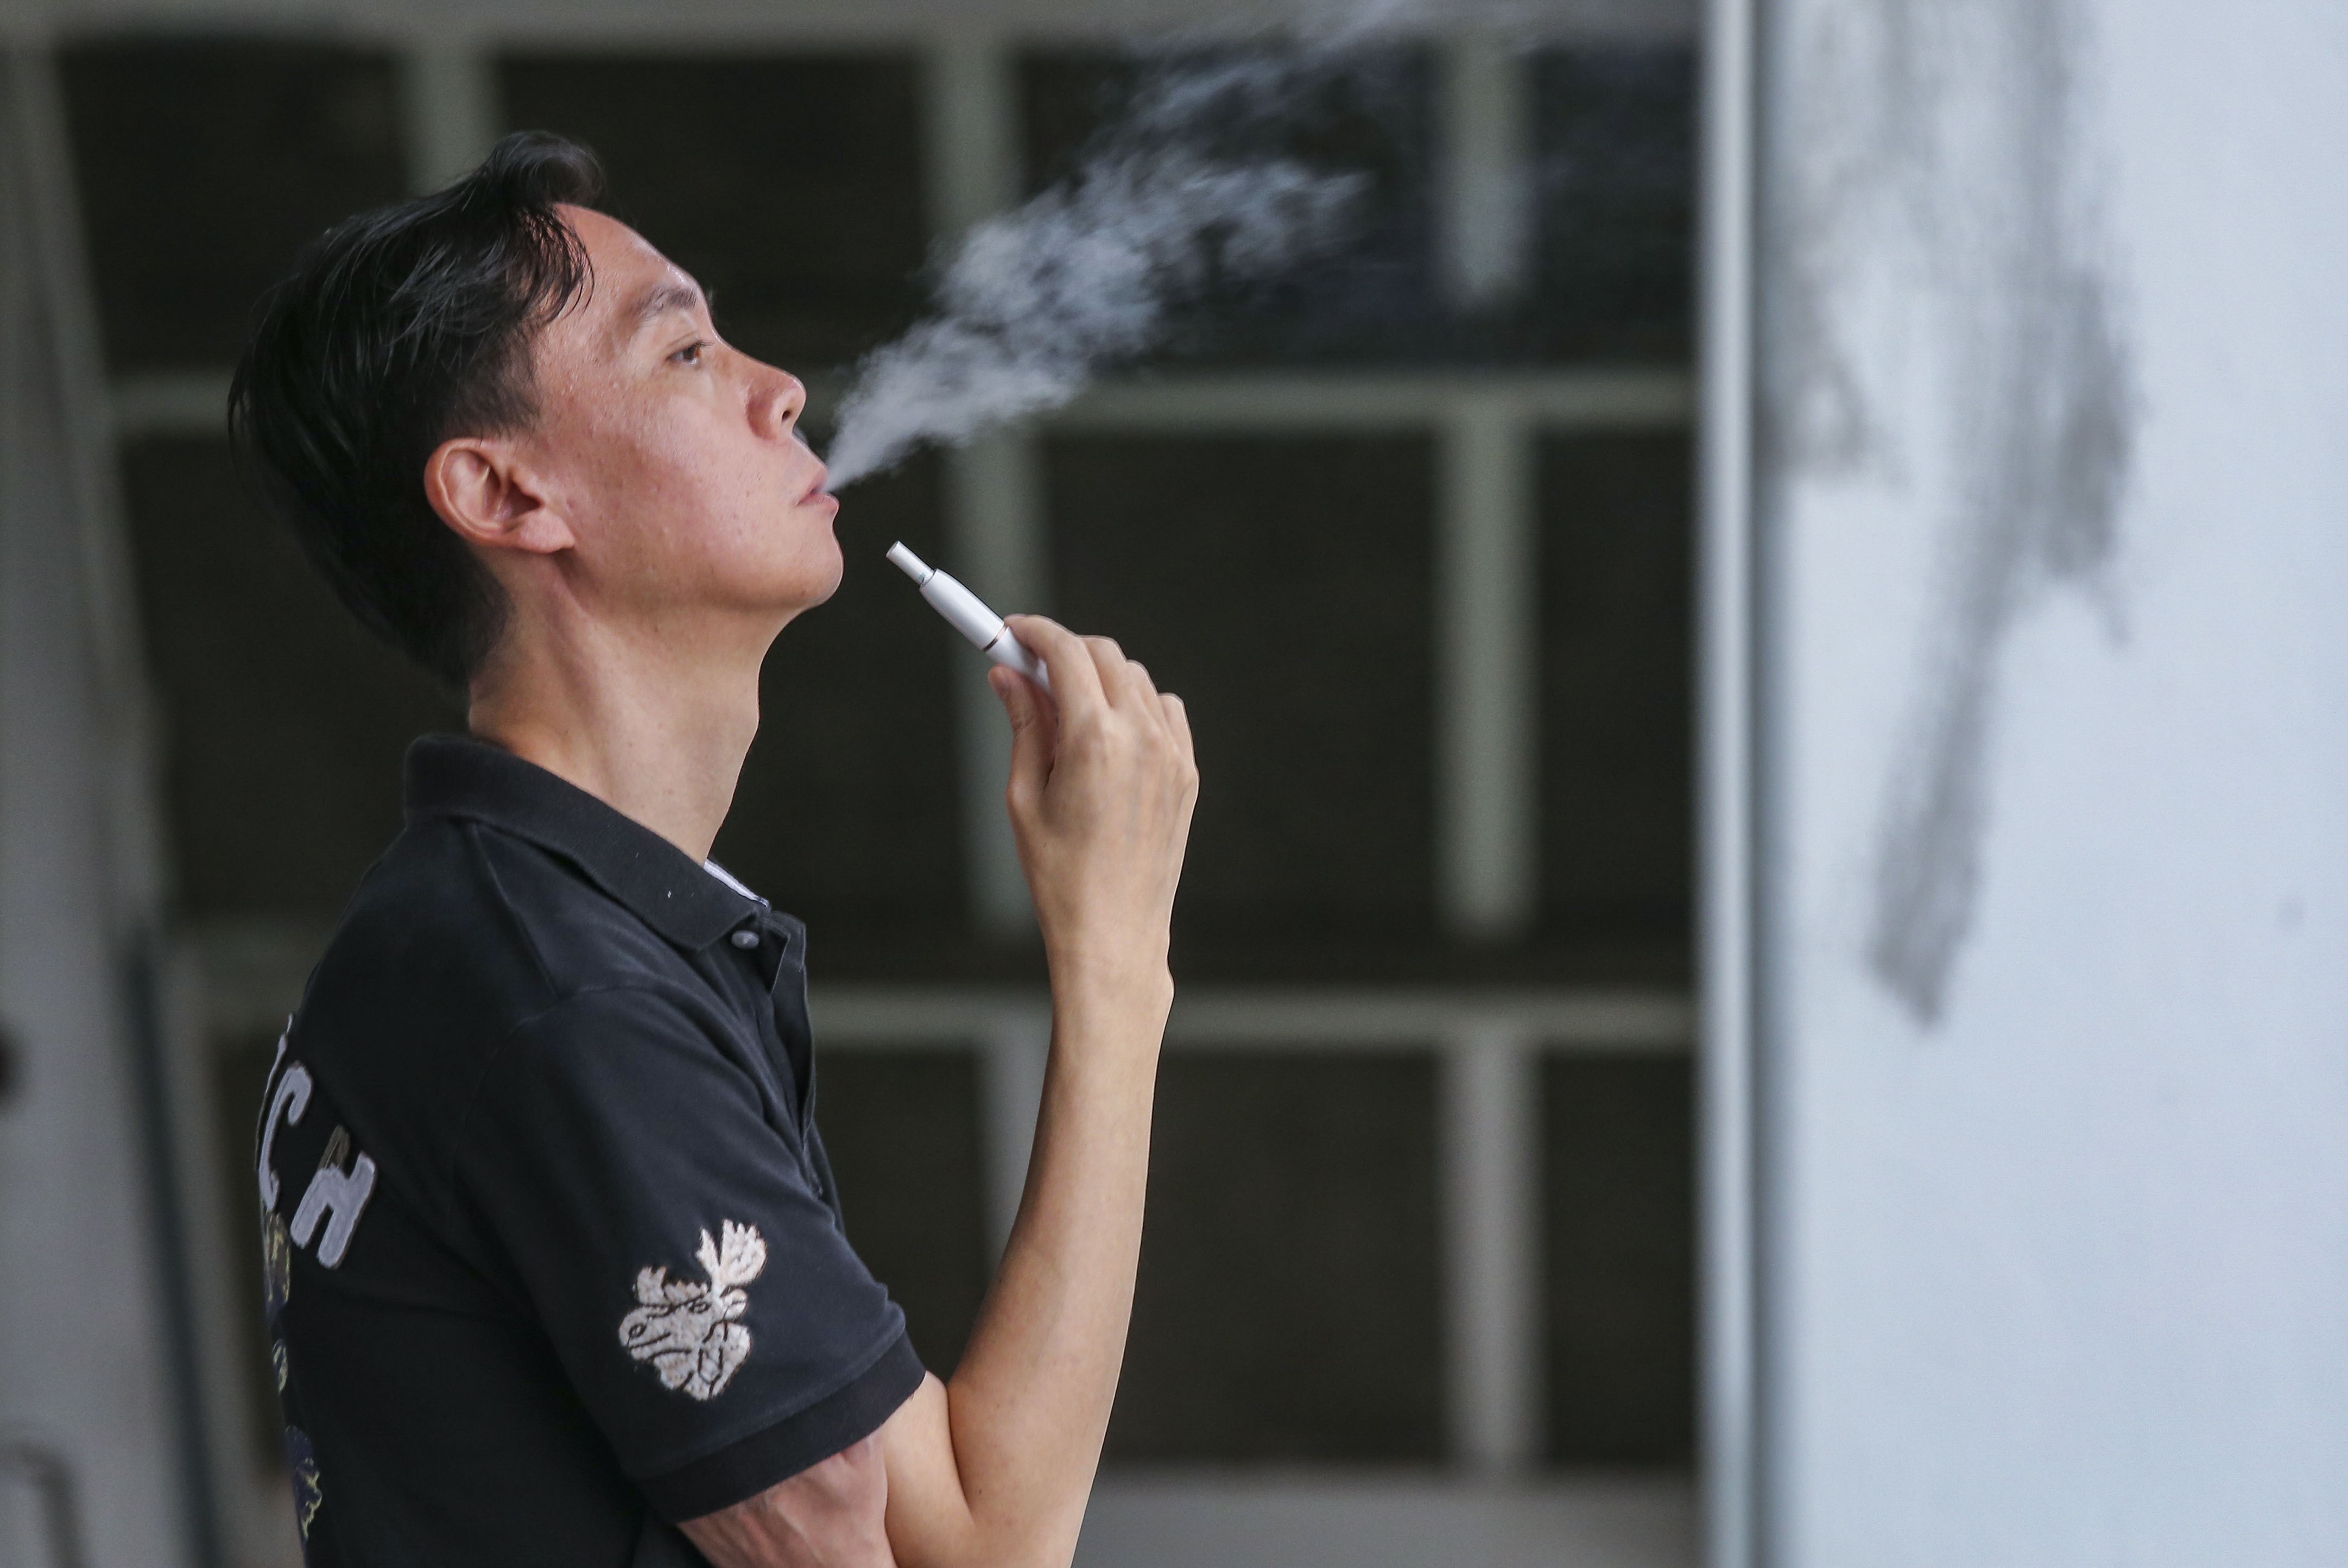 Peyton Chan was a smoker for 20 years. For 10 of those years he tried in vain to quit, and only succeeded when he switched to e-cigarettes. He thinks other smokers should have the chance to do the same